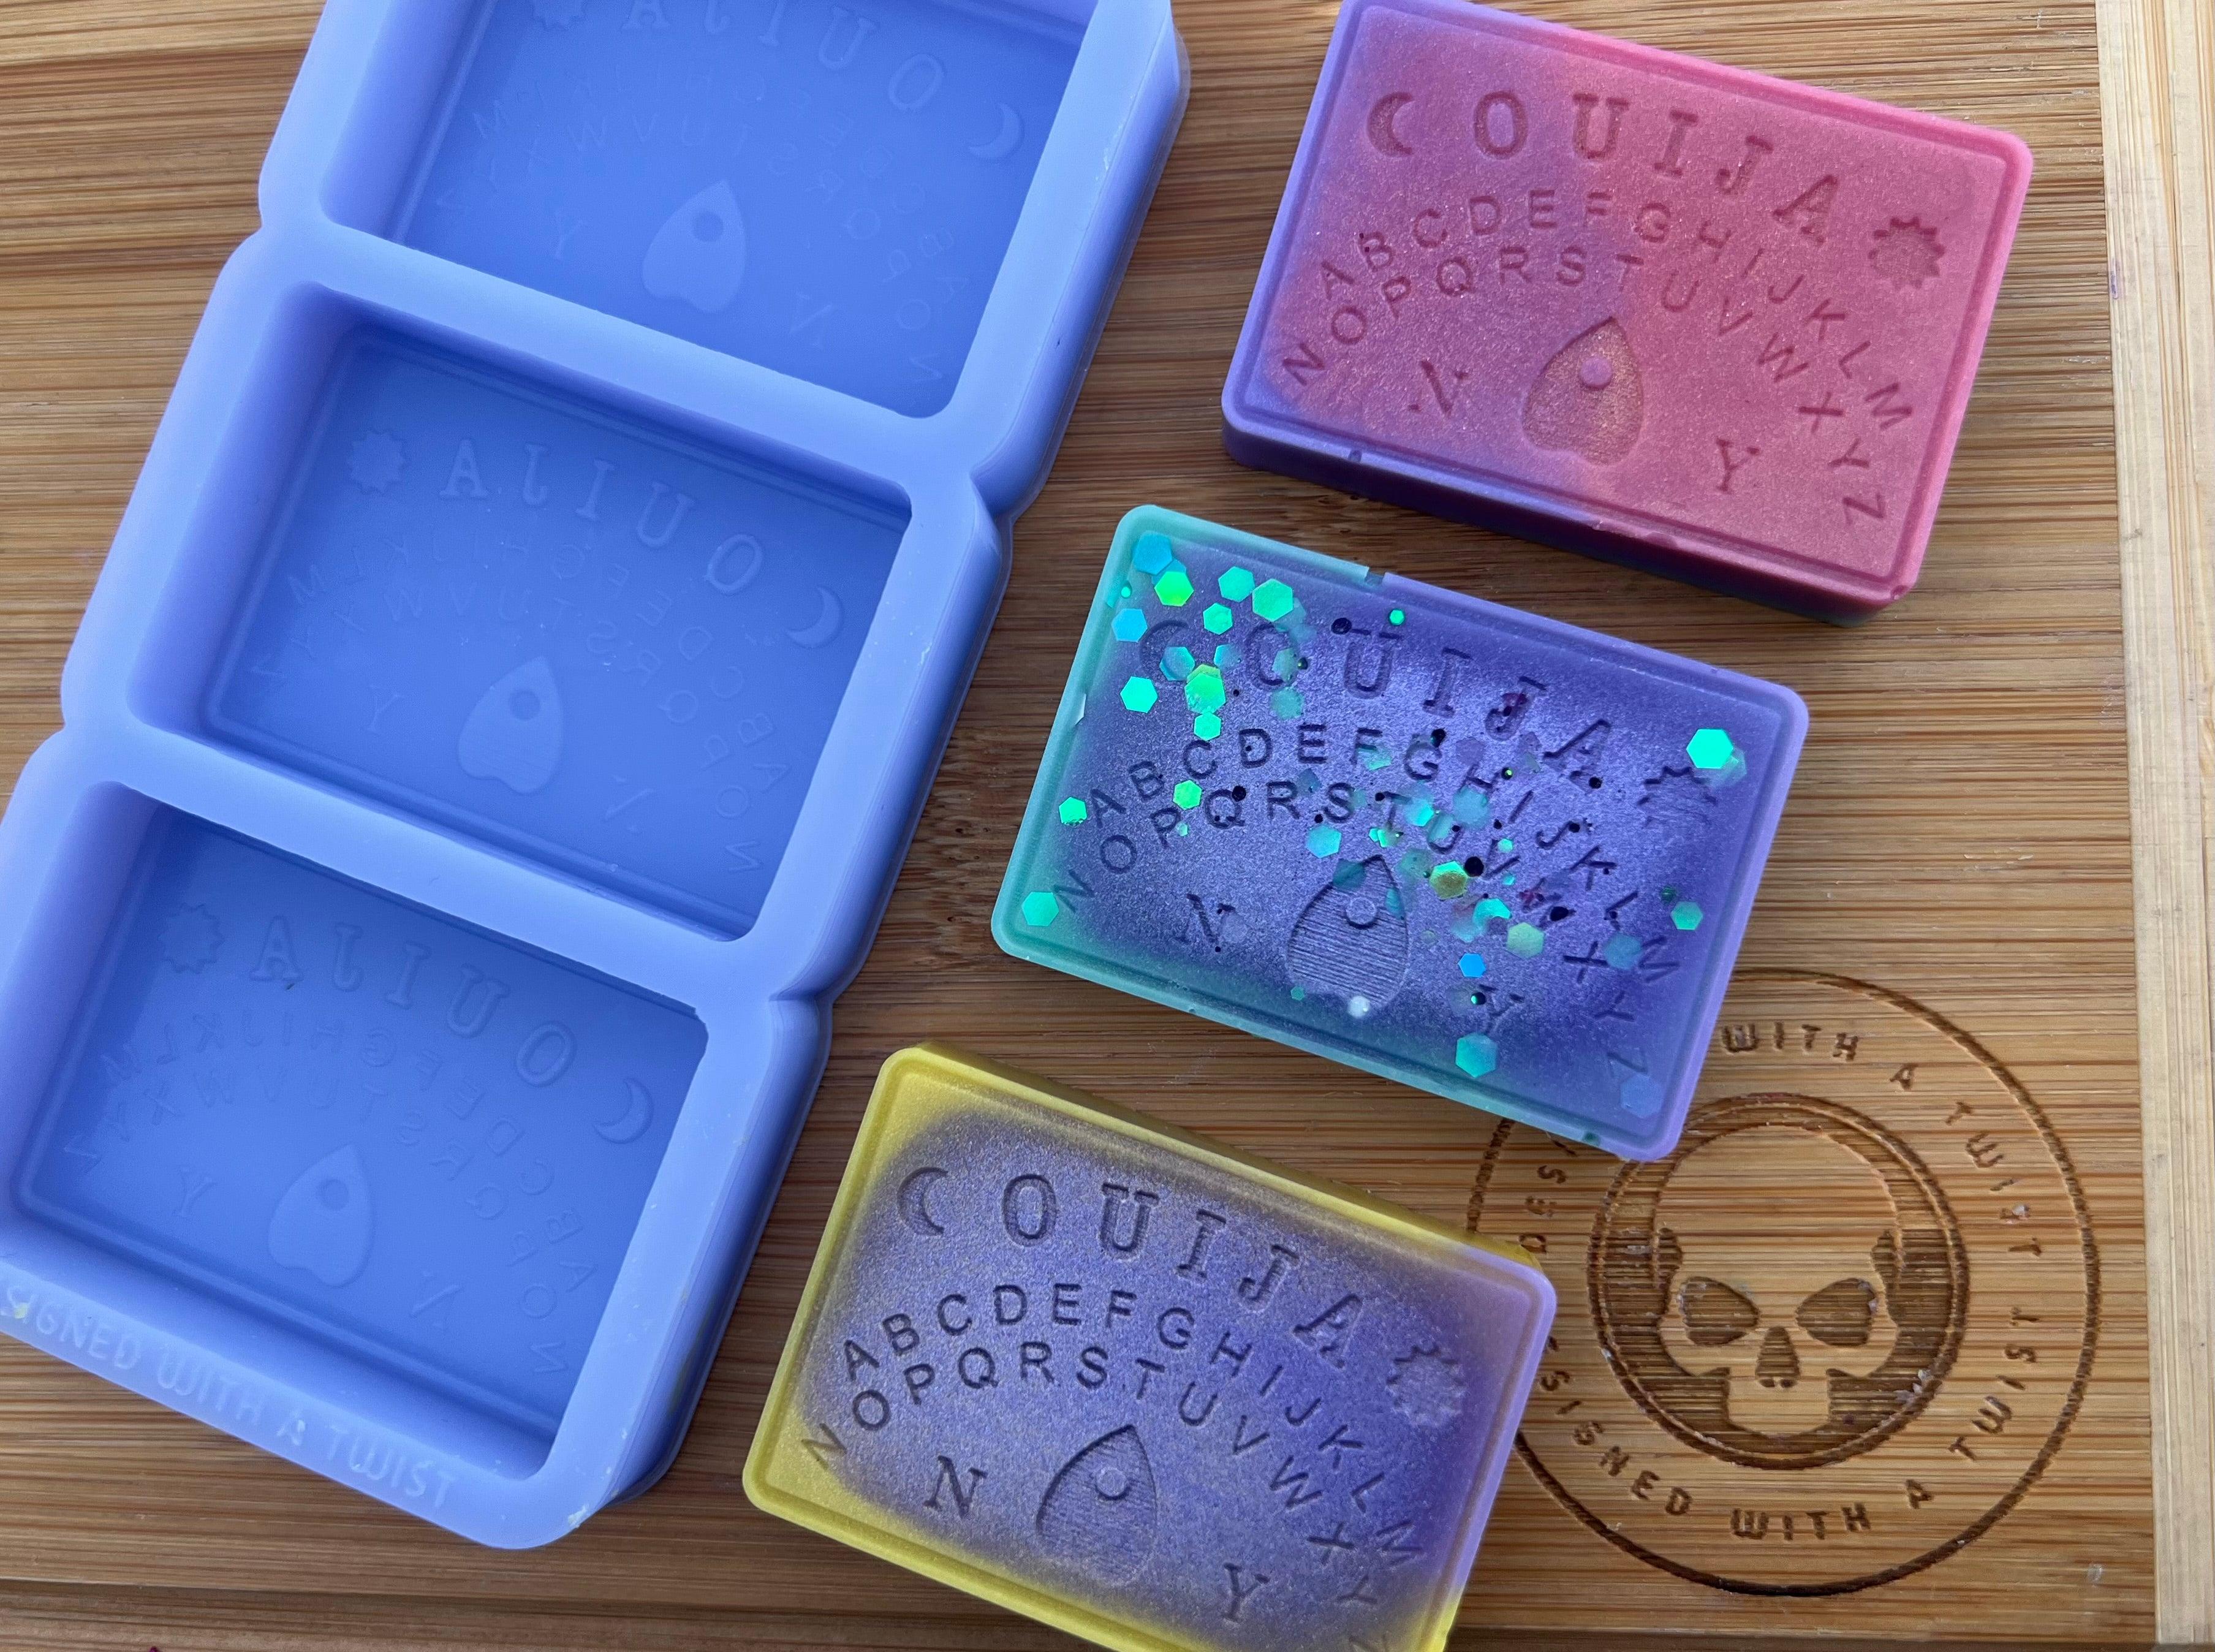 Ouija Board Wax Melt Silicone Mold - Designed with a Twist - Top quality silicone molds made in the UK.